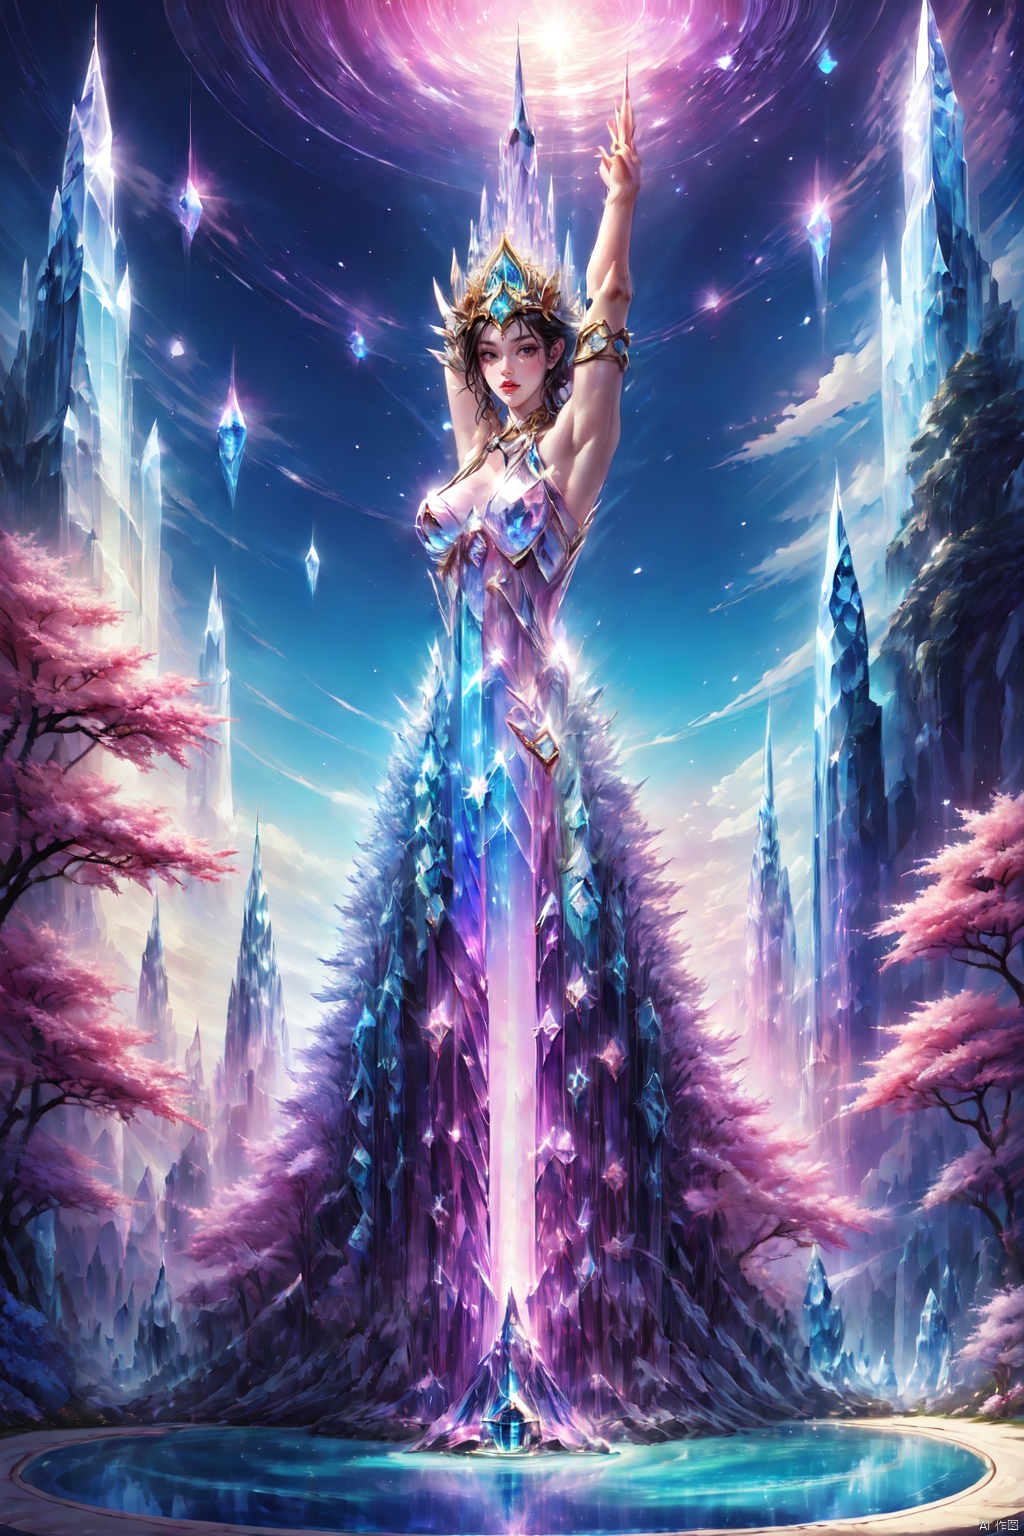 Concept art, surreal, Arnold, Carrara, vivid colors, light tracing, semi-backlight, (a goddess standing and dancing on the lake in front of the castle :1.5), expressive body language, (solo :1.3), (long white hair with streaks of stardust), sexy figure, (Transparent peacock dress :1.5), ((beautiful delicate features AND vivid expression)), ((hands drooping)), (peacock feathers, (halo), (halo), eternal elegance, (biofluorescence AND starlight effect), (ripples on the water surface spread out :1.5), dreamy atmosphere, (Mysterious Fantasy Crystal Castle background :1.5), imaginative story, timeless art, close-ups, Panoramas, captivating visuals, CG, OC rendering, UE5, Soft Focus, f/16 aperture, Best Quality, Ultra HD, Ultra High Resolution, Top Quality, Masterpiece, 8K Resolution, Complex Detail, Ultra Detailed Detail, Fantasy Palace